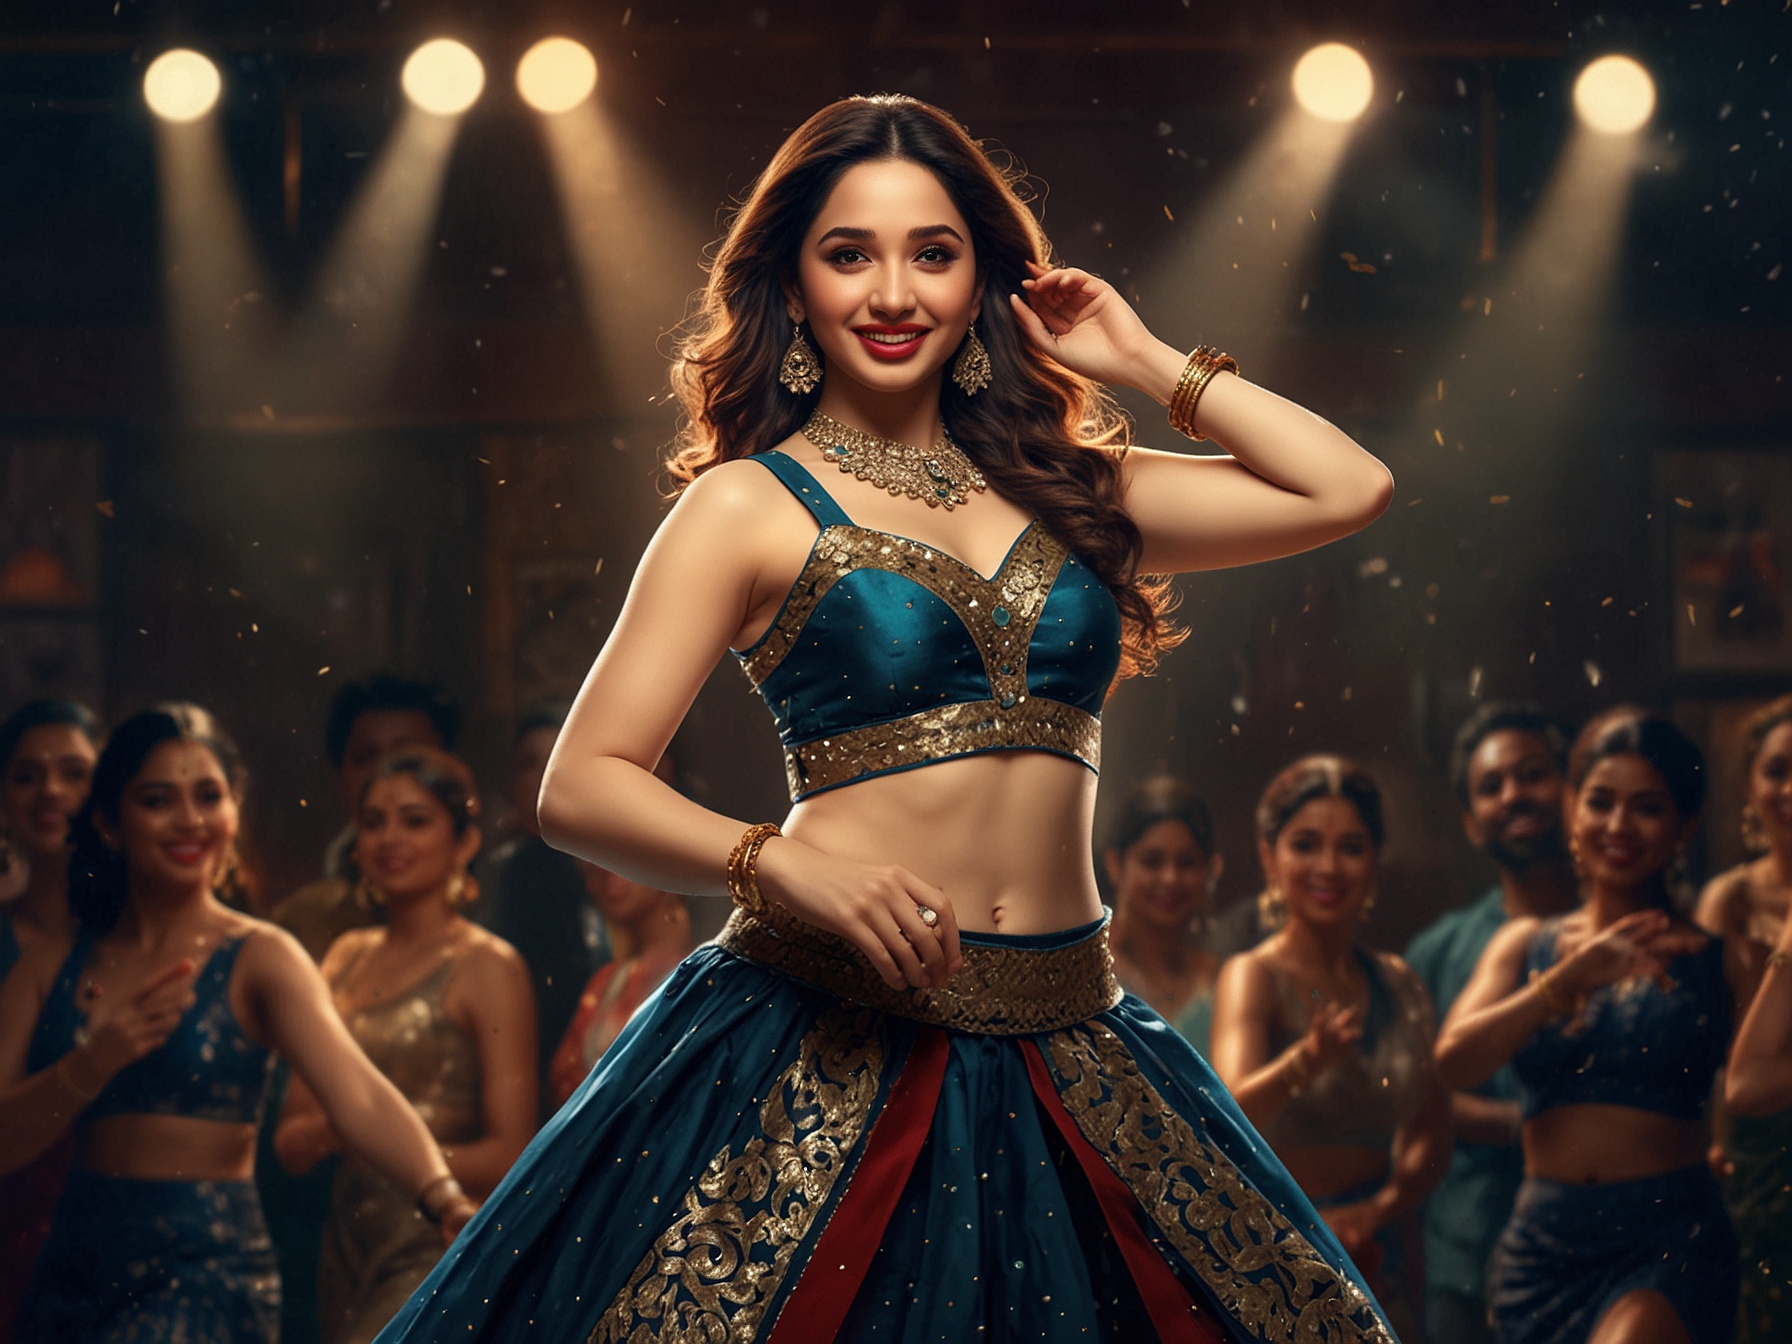 Tamannaah Bhatia performing a stunning item dance, adding glamour and excitement to the 'Stree 2' teaser, poised to captivate audiences with her exceptional dance skills and charisma.